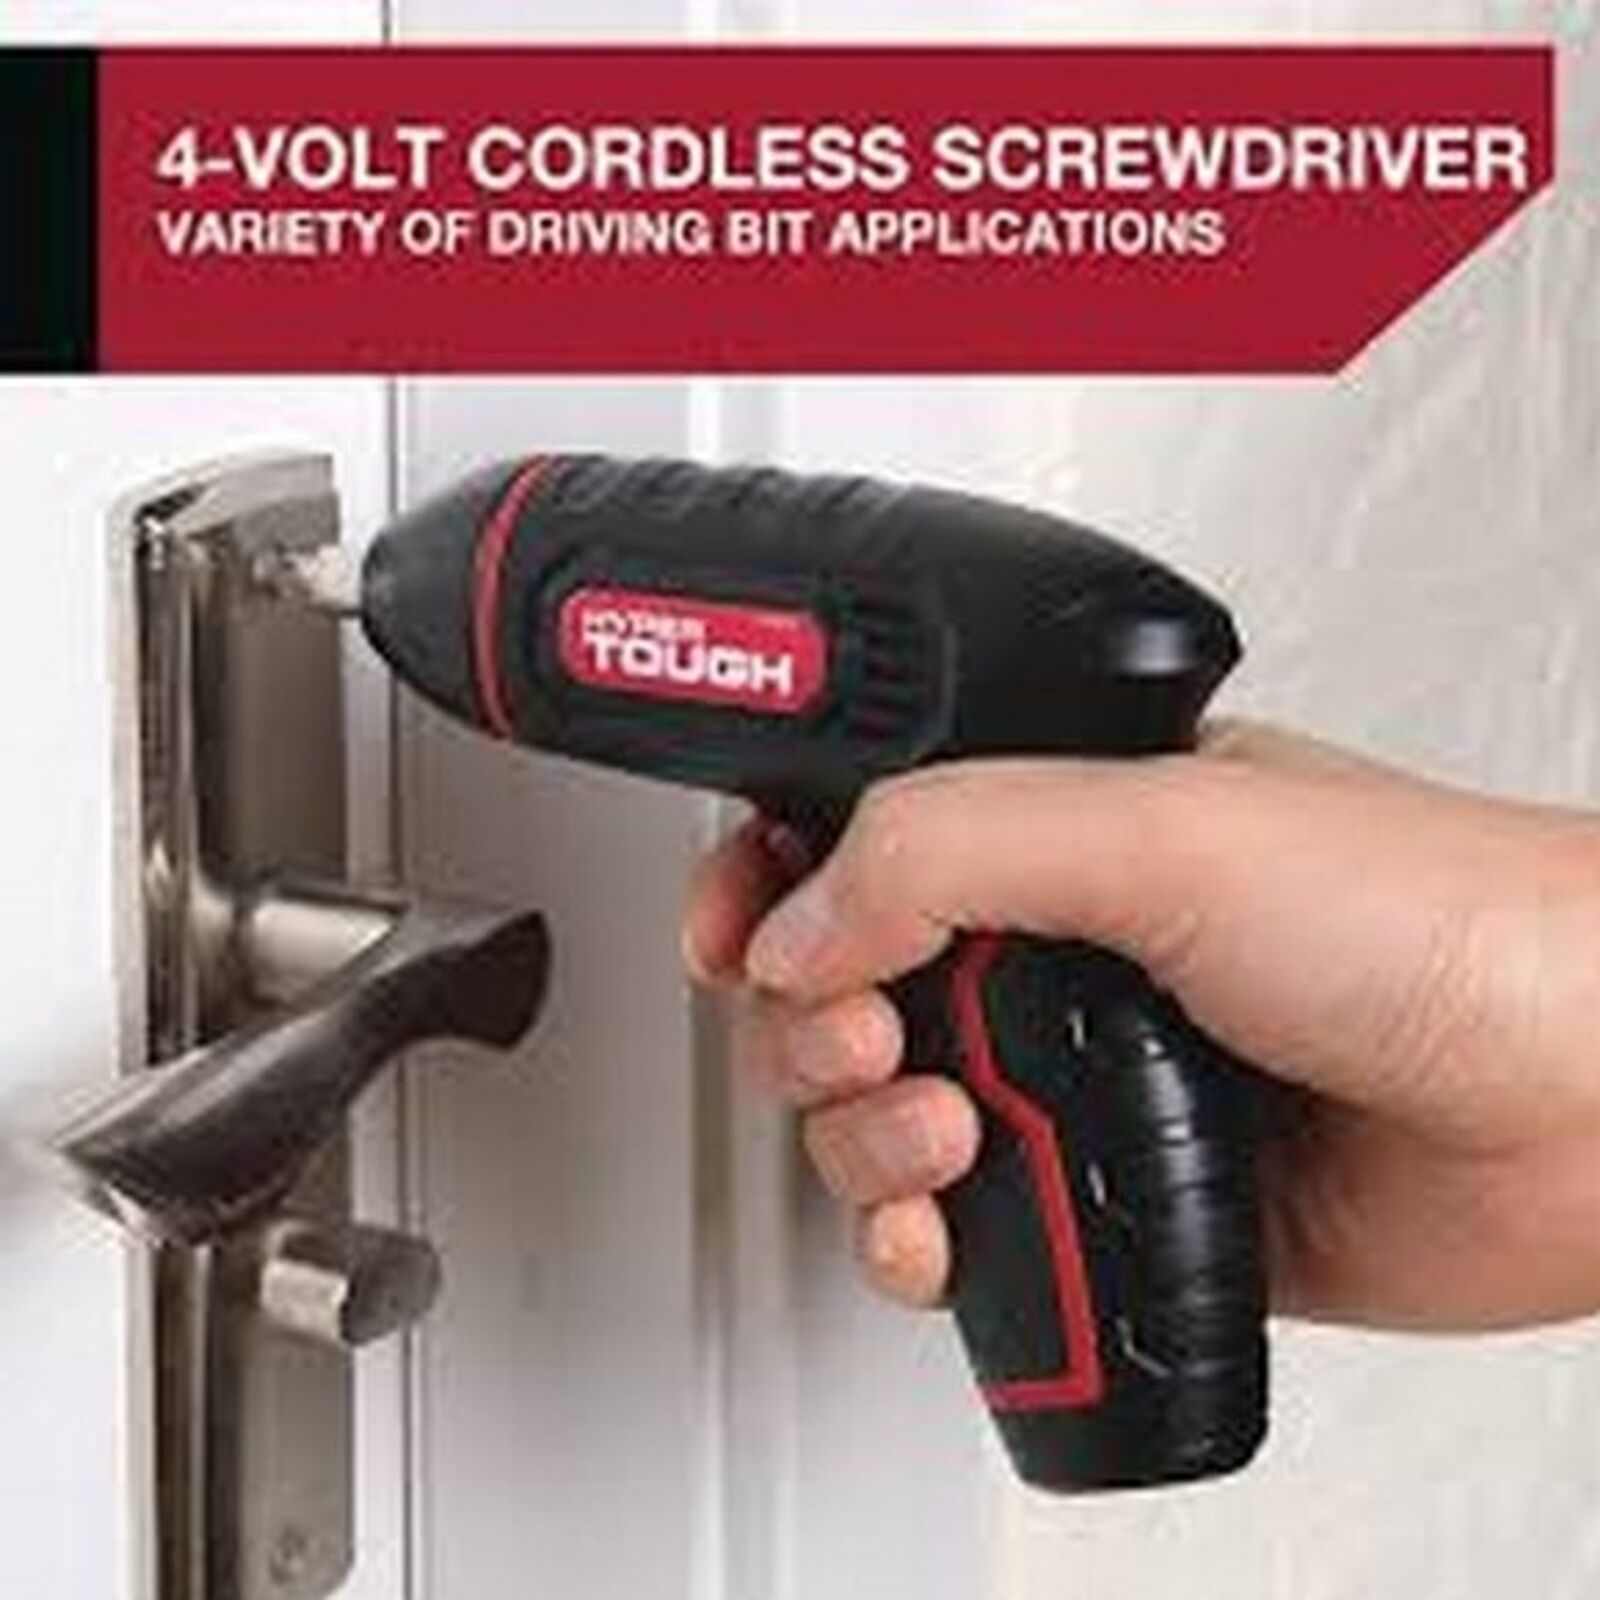  NWT Screwdriver HYPER TOUGH Rechargeable 4 Volt Cordless Drill Power Tool Kit - $49.50